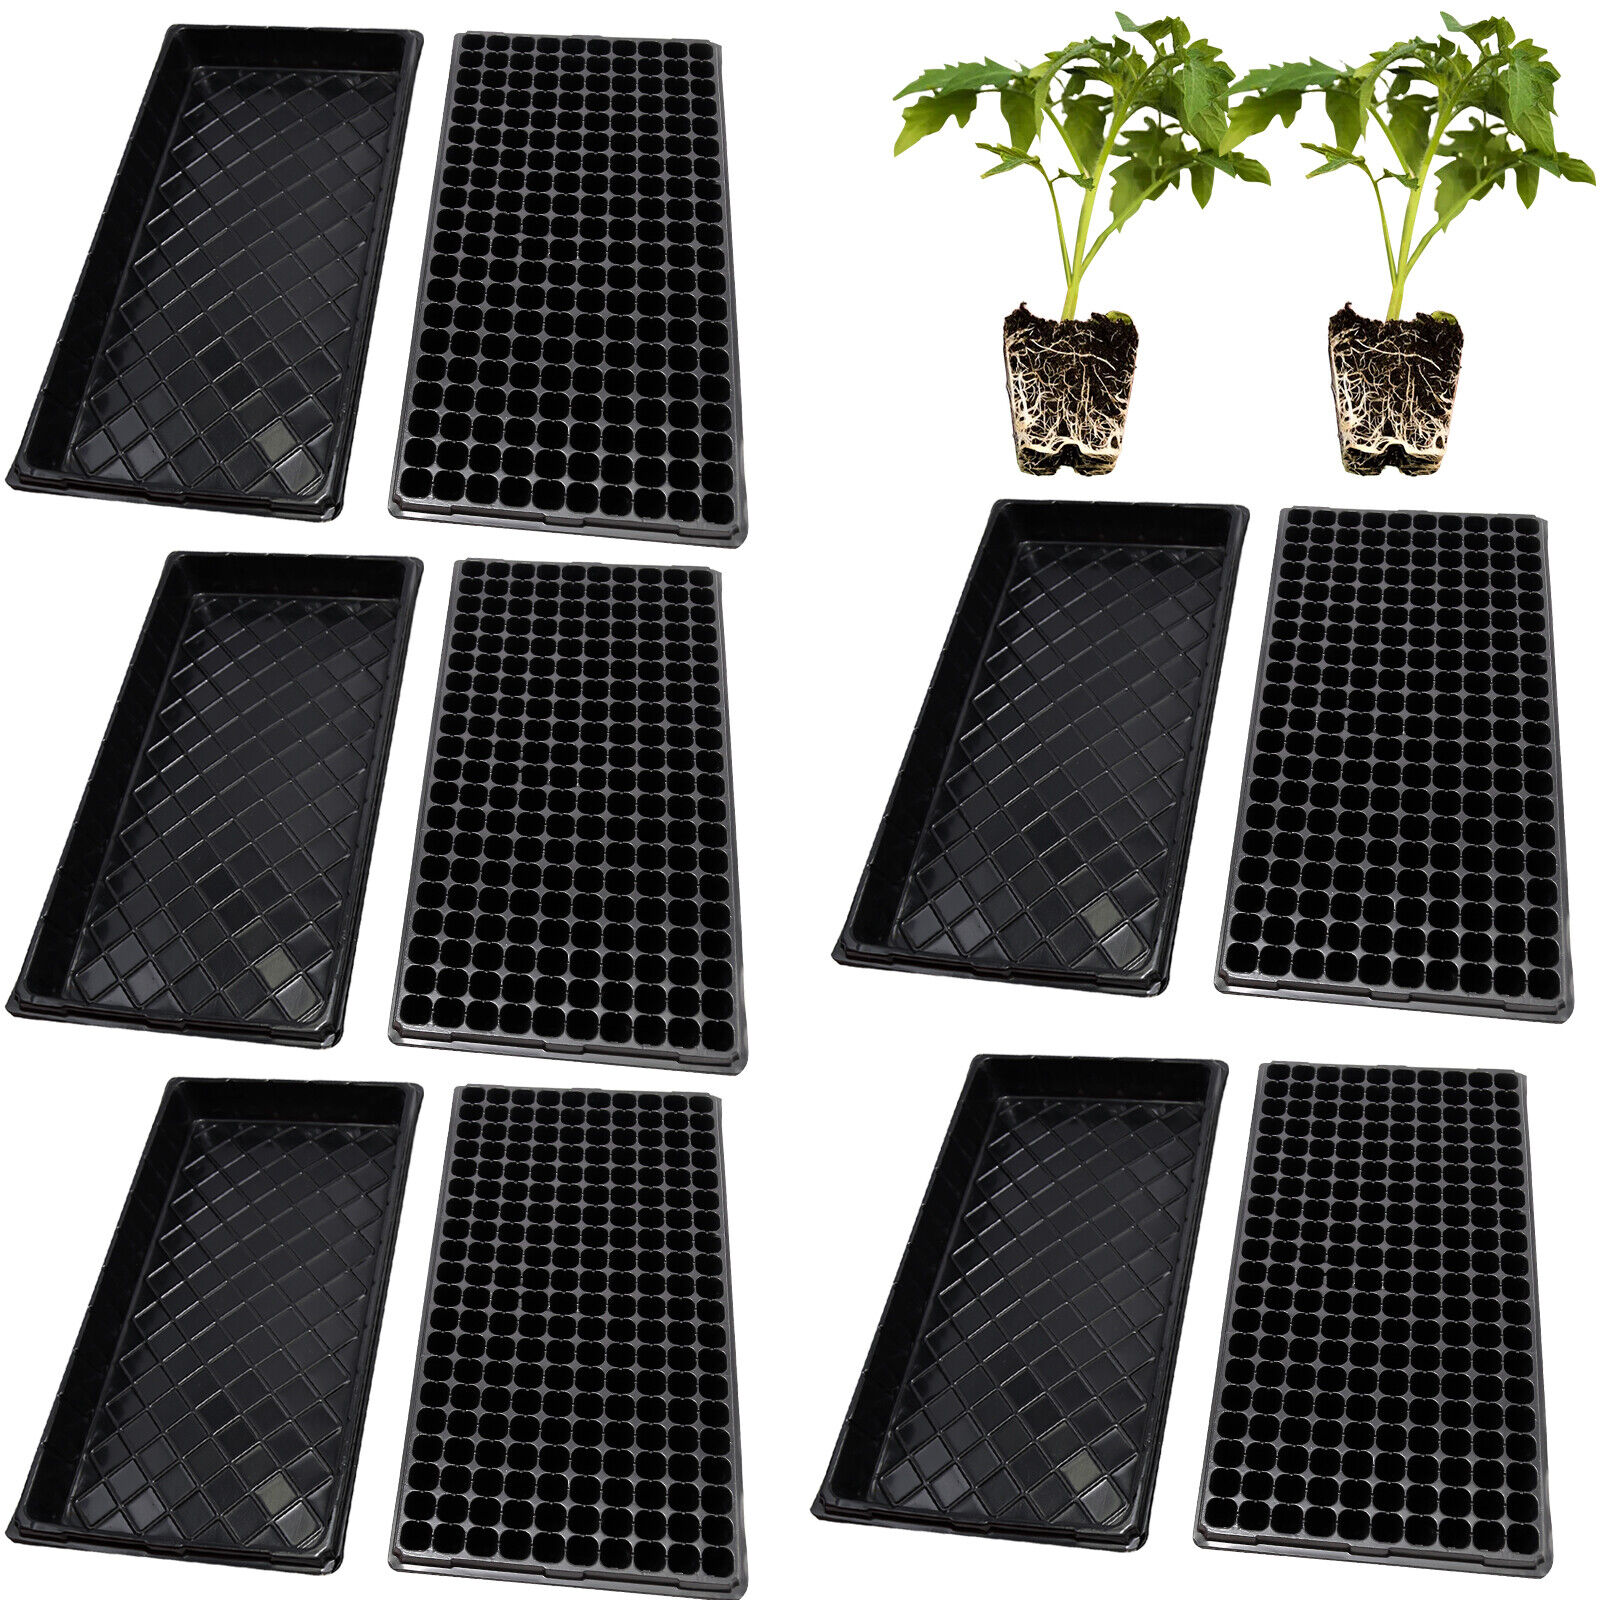 5x Seed Starting Trays+5x 200-Cell Plug Trays Sets For Cloning Propagation Flats